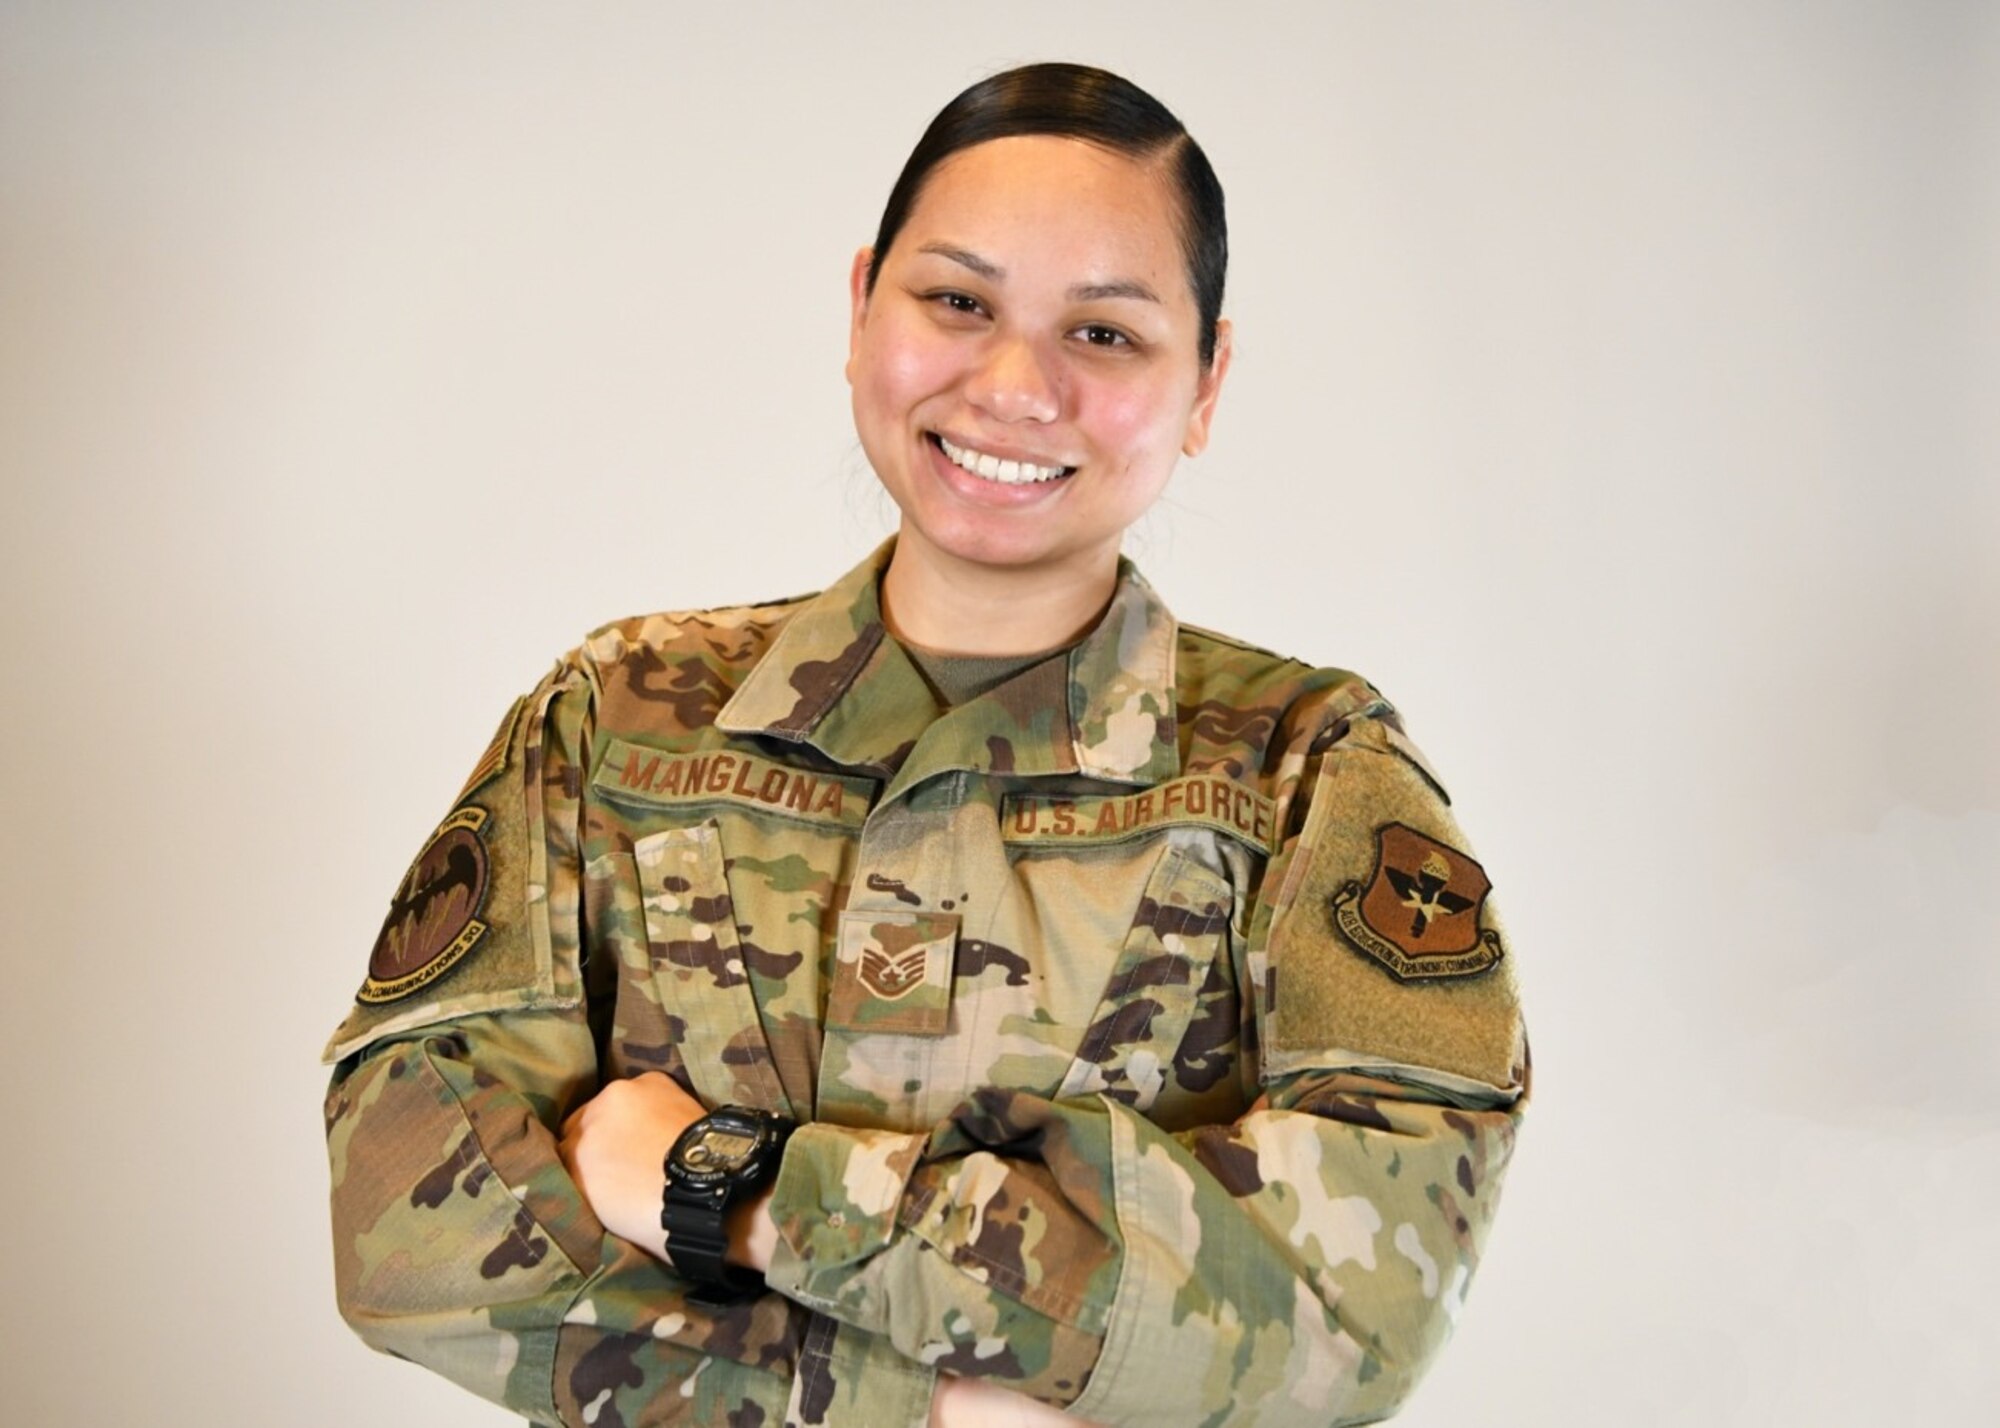 Staff Sgt. Conralyn Manglona, 56th Communications Squadron knowledge management technician, poses for a photo May 24, 2021, at Luke Air Force Base, Arizona. Manglona represents the diversity across the United States Air Force. Asian American and Pacific Islander Heritage Month is recognized in the month of May to celebrate the achievements of Asian American and Pacific Islander men and women. (U.S. Air Force photo by Senior Airman Caitlin Diaz-Gorsi)